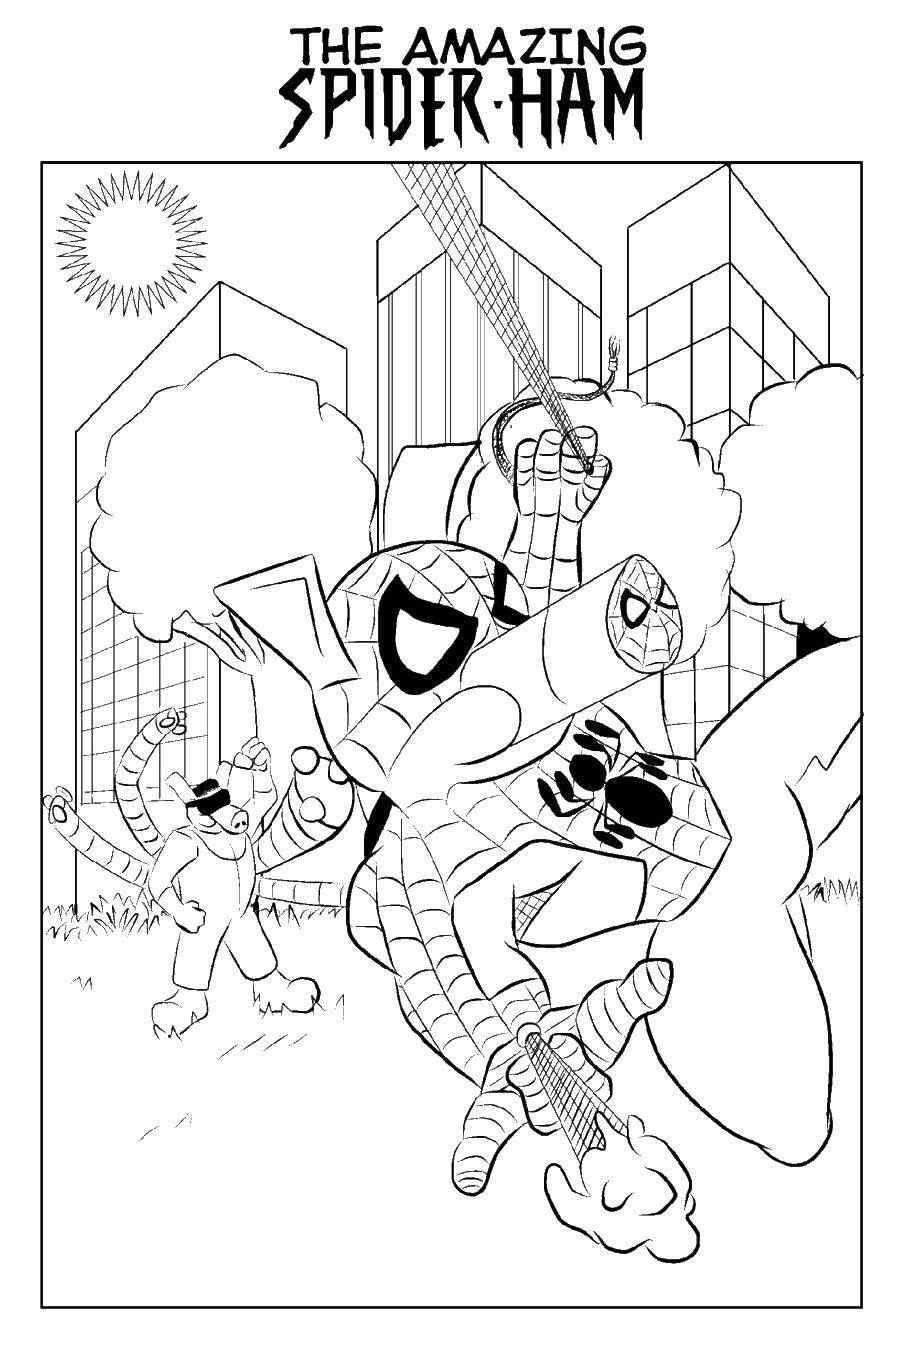 Coloring Spider-man. Category Comics. Tags:  spider man, spider web , super hero.